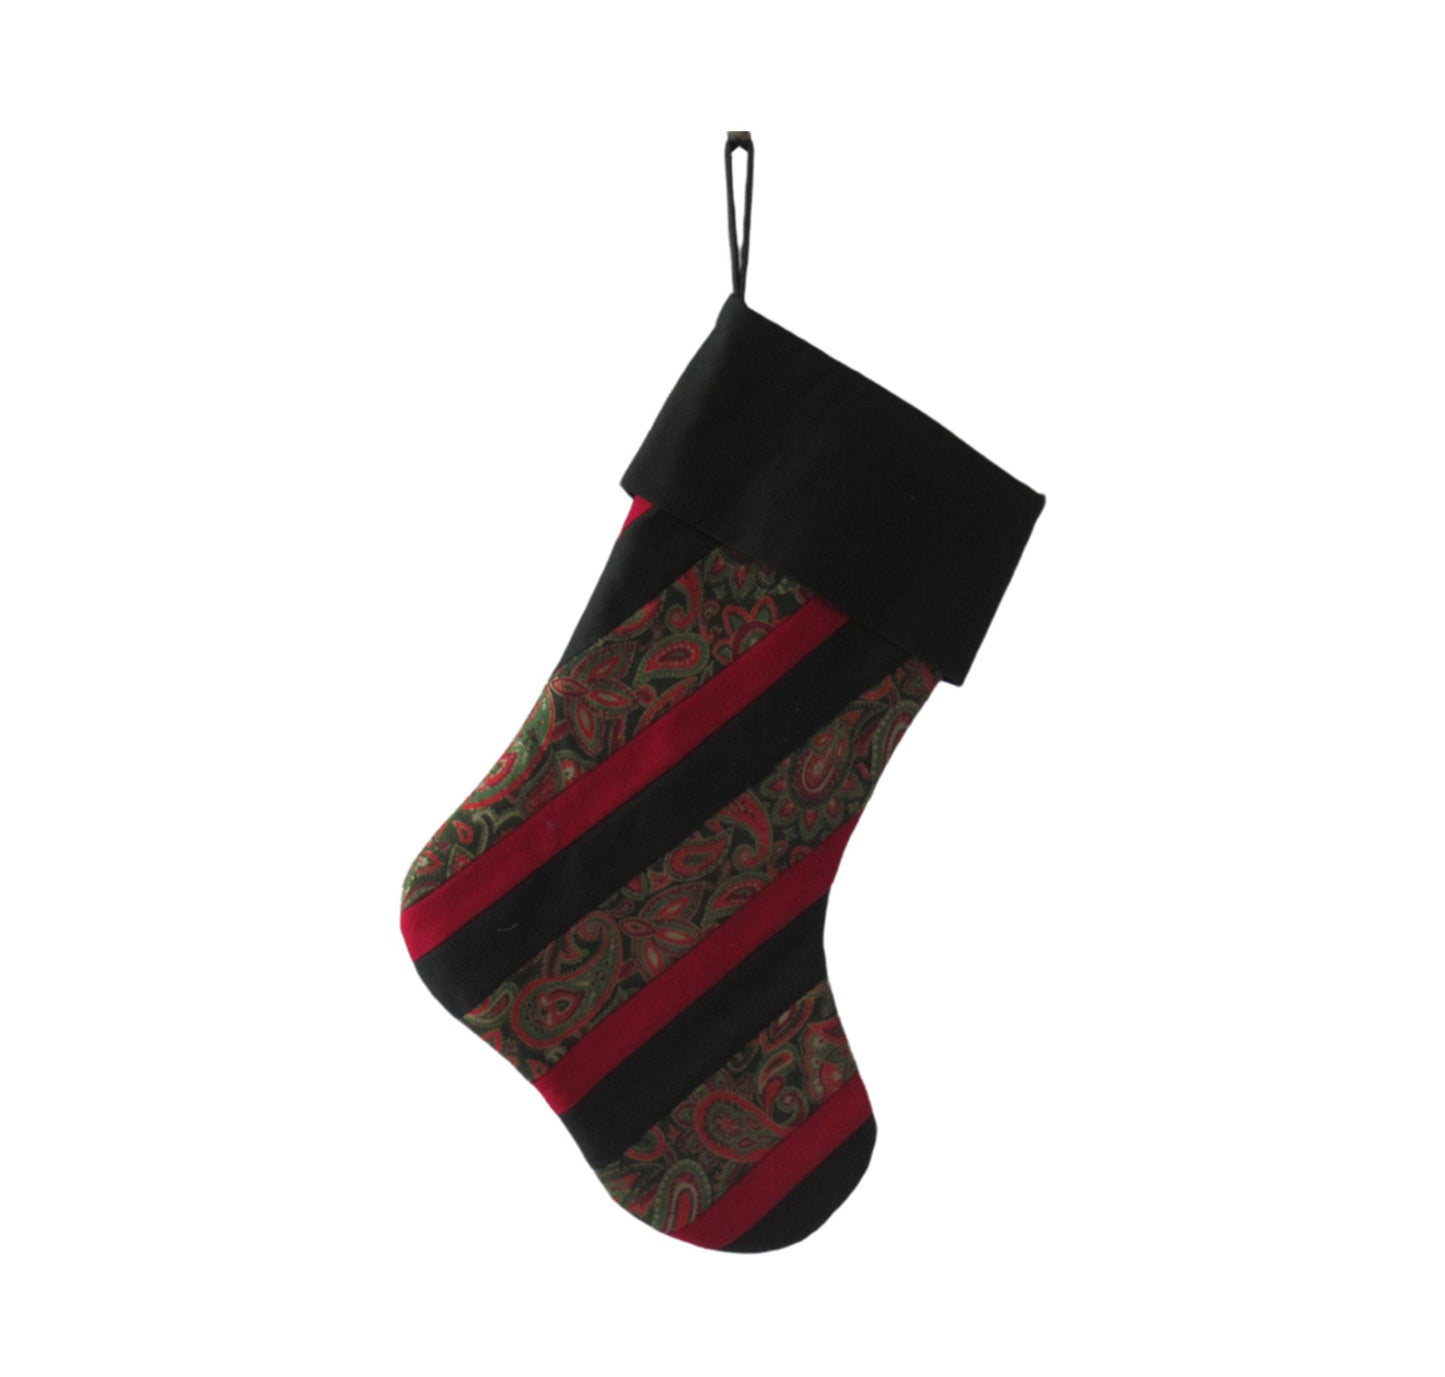 It's Christmas in July! (4 days only) Quilted Christmas Stocking - Handmade Christmas Stocking - Country Christmas Stocking - Red and Green Christmas Stocking - Stocking 05